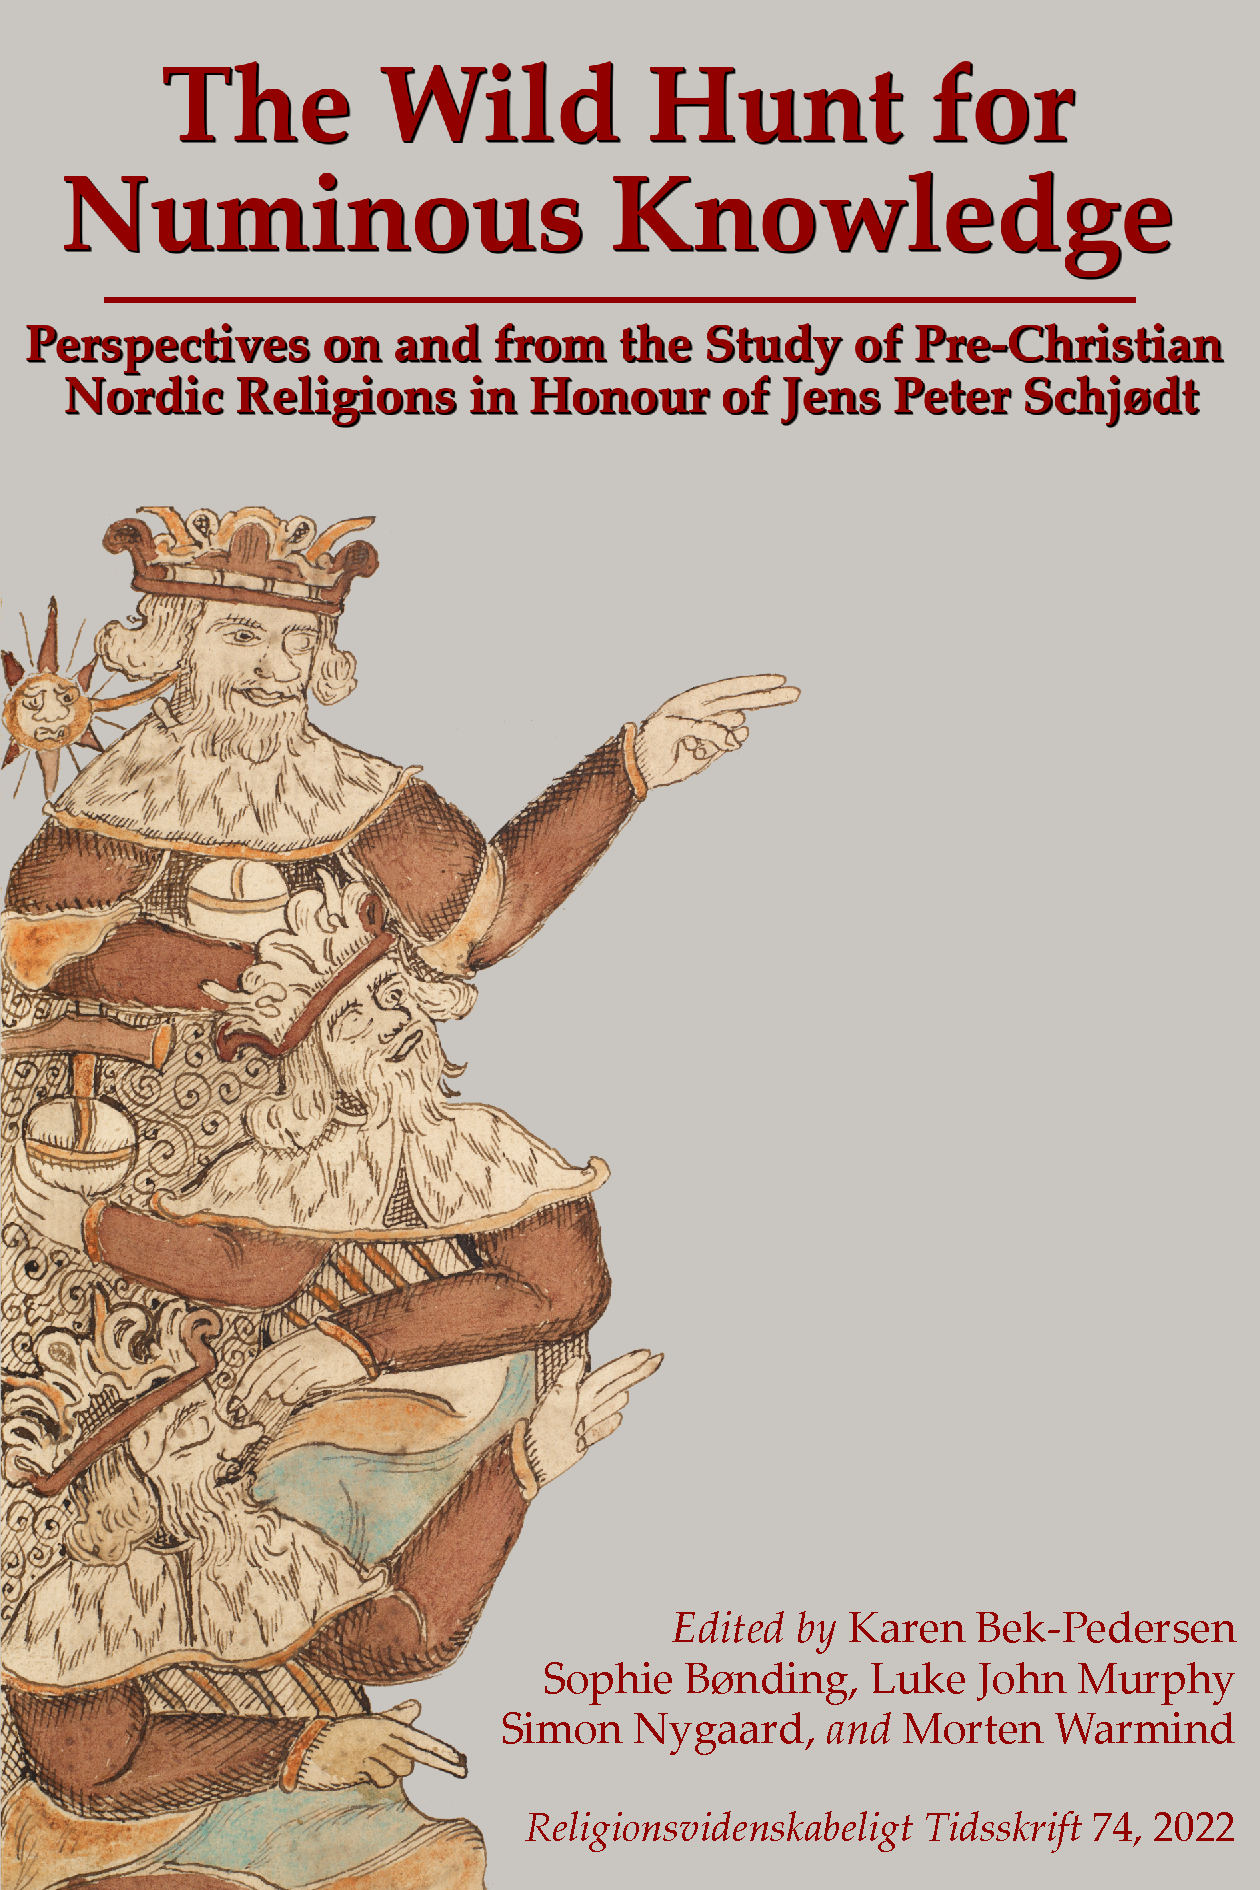 					Se Årg. 74 (2022): The Wild Hunt for Numinous Knowledge: Perspectives on and from the Study of Pre-Christian Nordic Religions in Honour of Jens Peter Schjødt
				